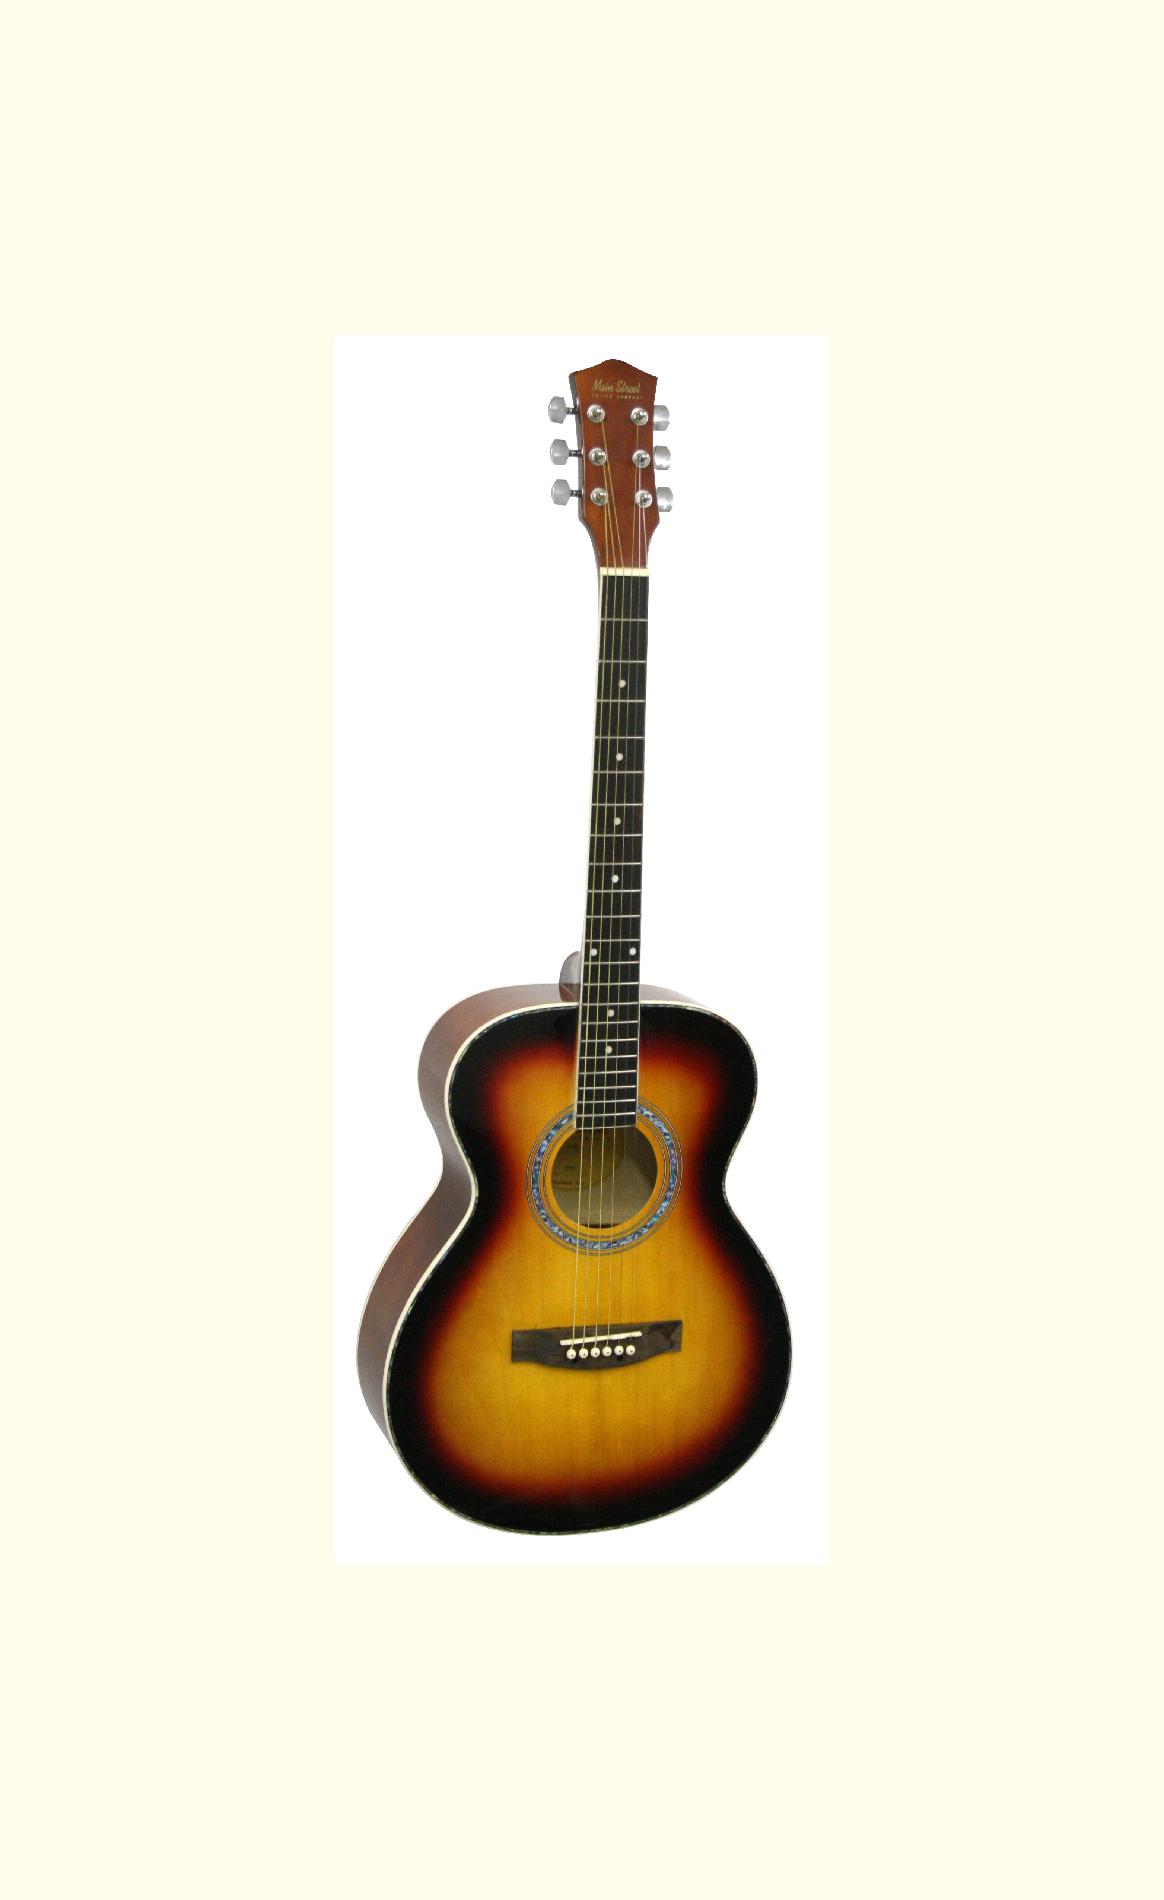 Main Street 40-Inch Acoustic Guitar with Tobacco Sunburst Finish